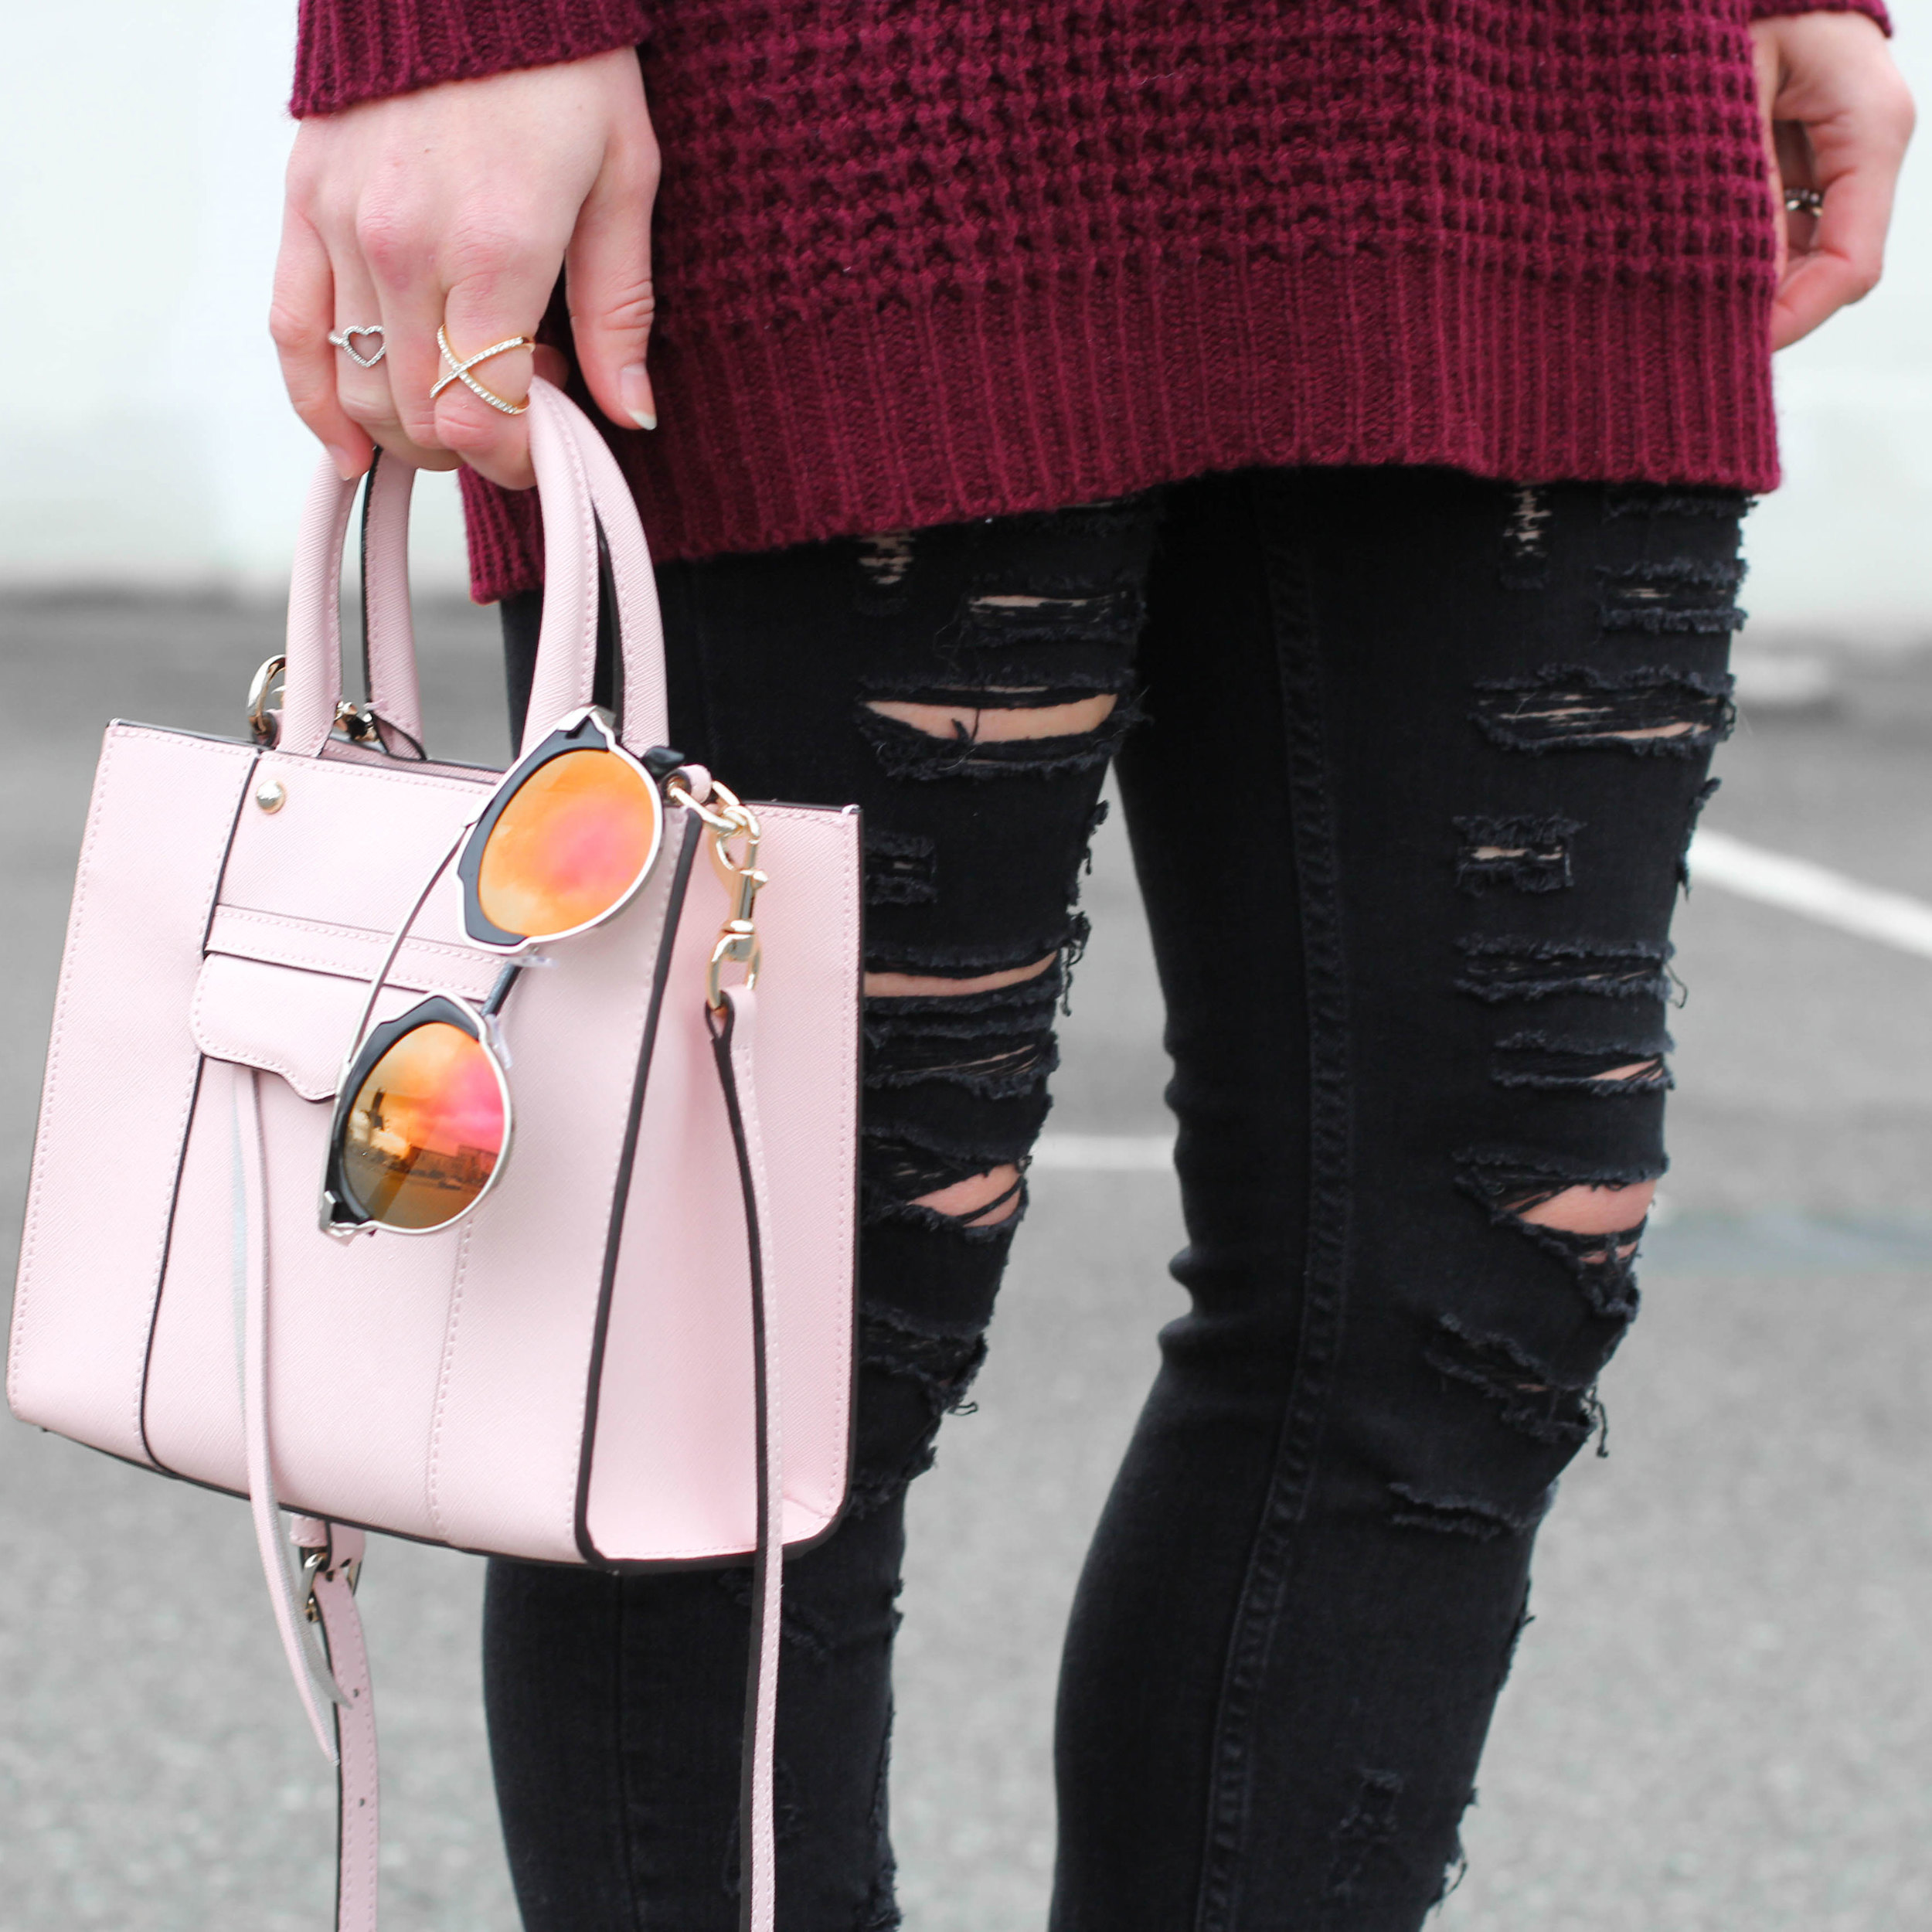 Casual Valentine's Day Outfit, Burgundy Tunic Sweater, Burgundy Pumps, Light Pink Rebecca Minkoff Mini Mab Tote, Black Destroyed Jeans, Dior Look Alike Sunglasses